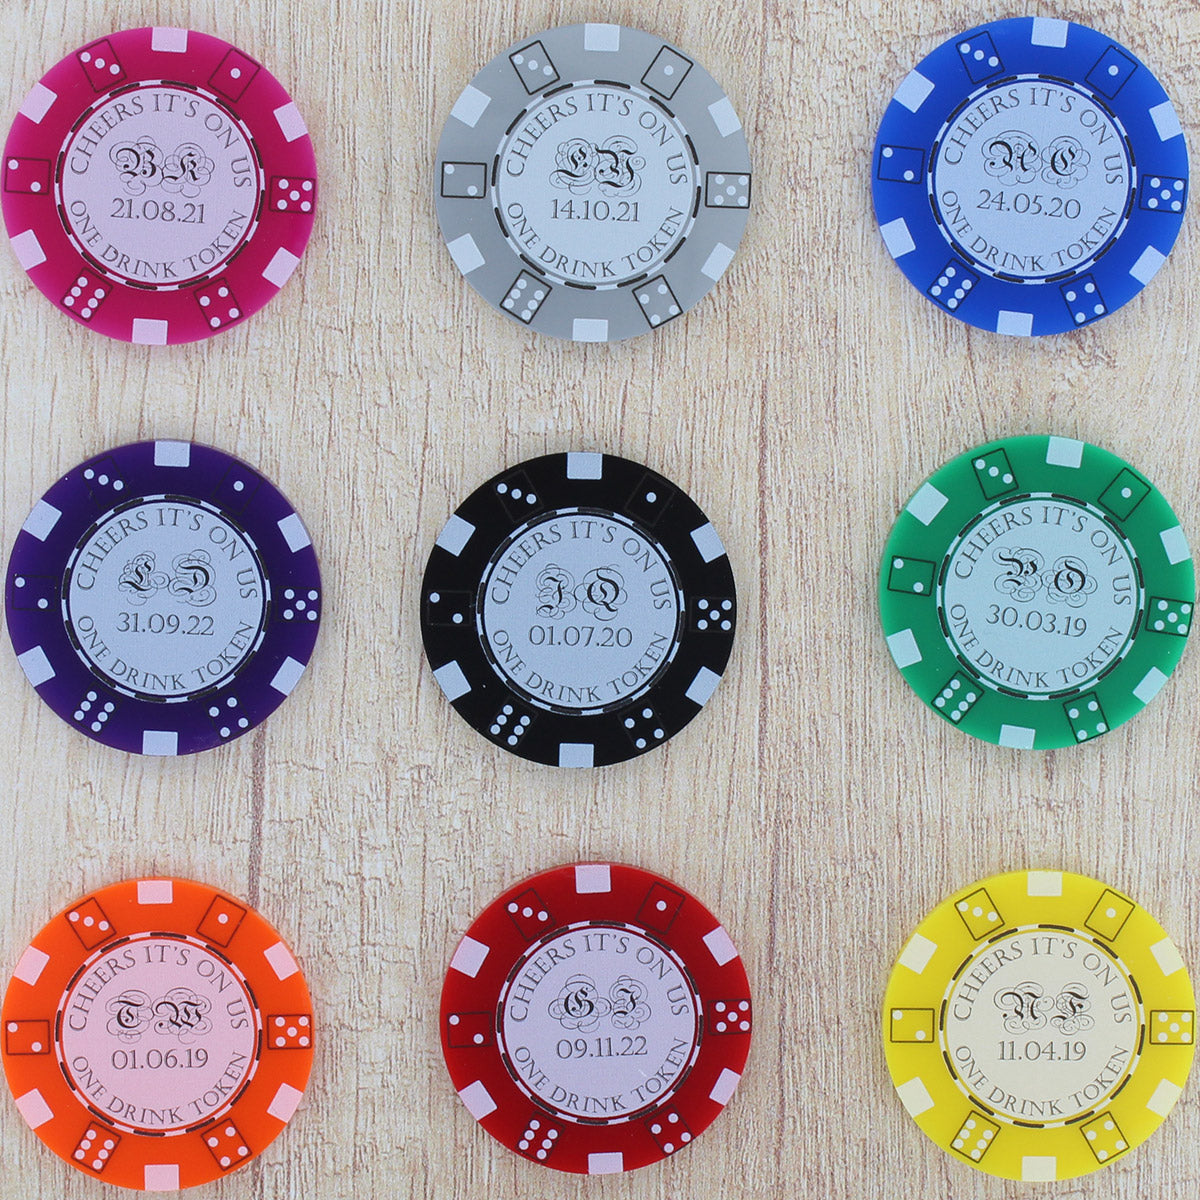 Poker Chip Drink Token Wedding Favours Personalised Casino Party Las Vegas Decor - Pack of 10